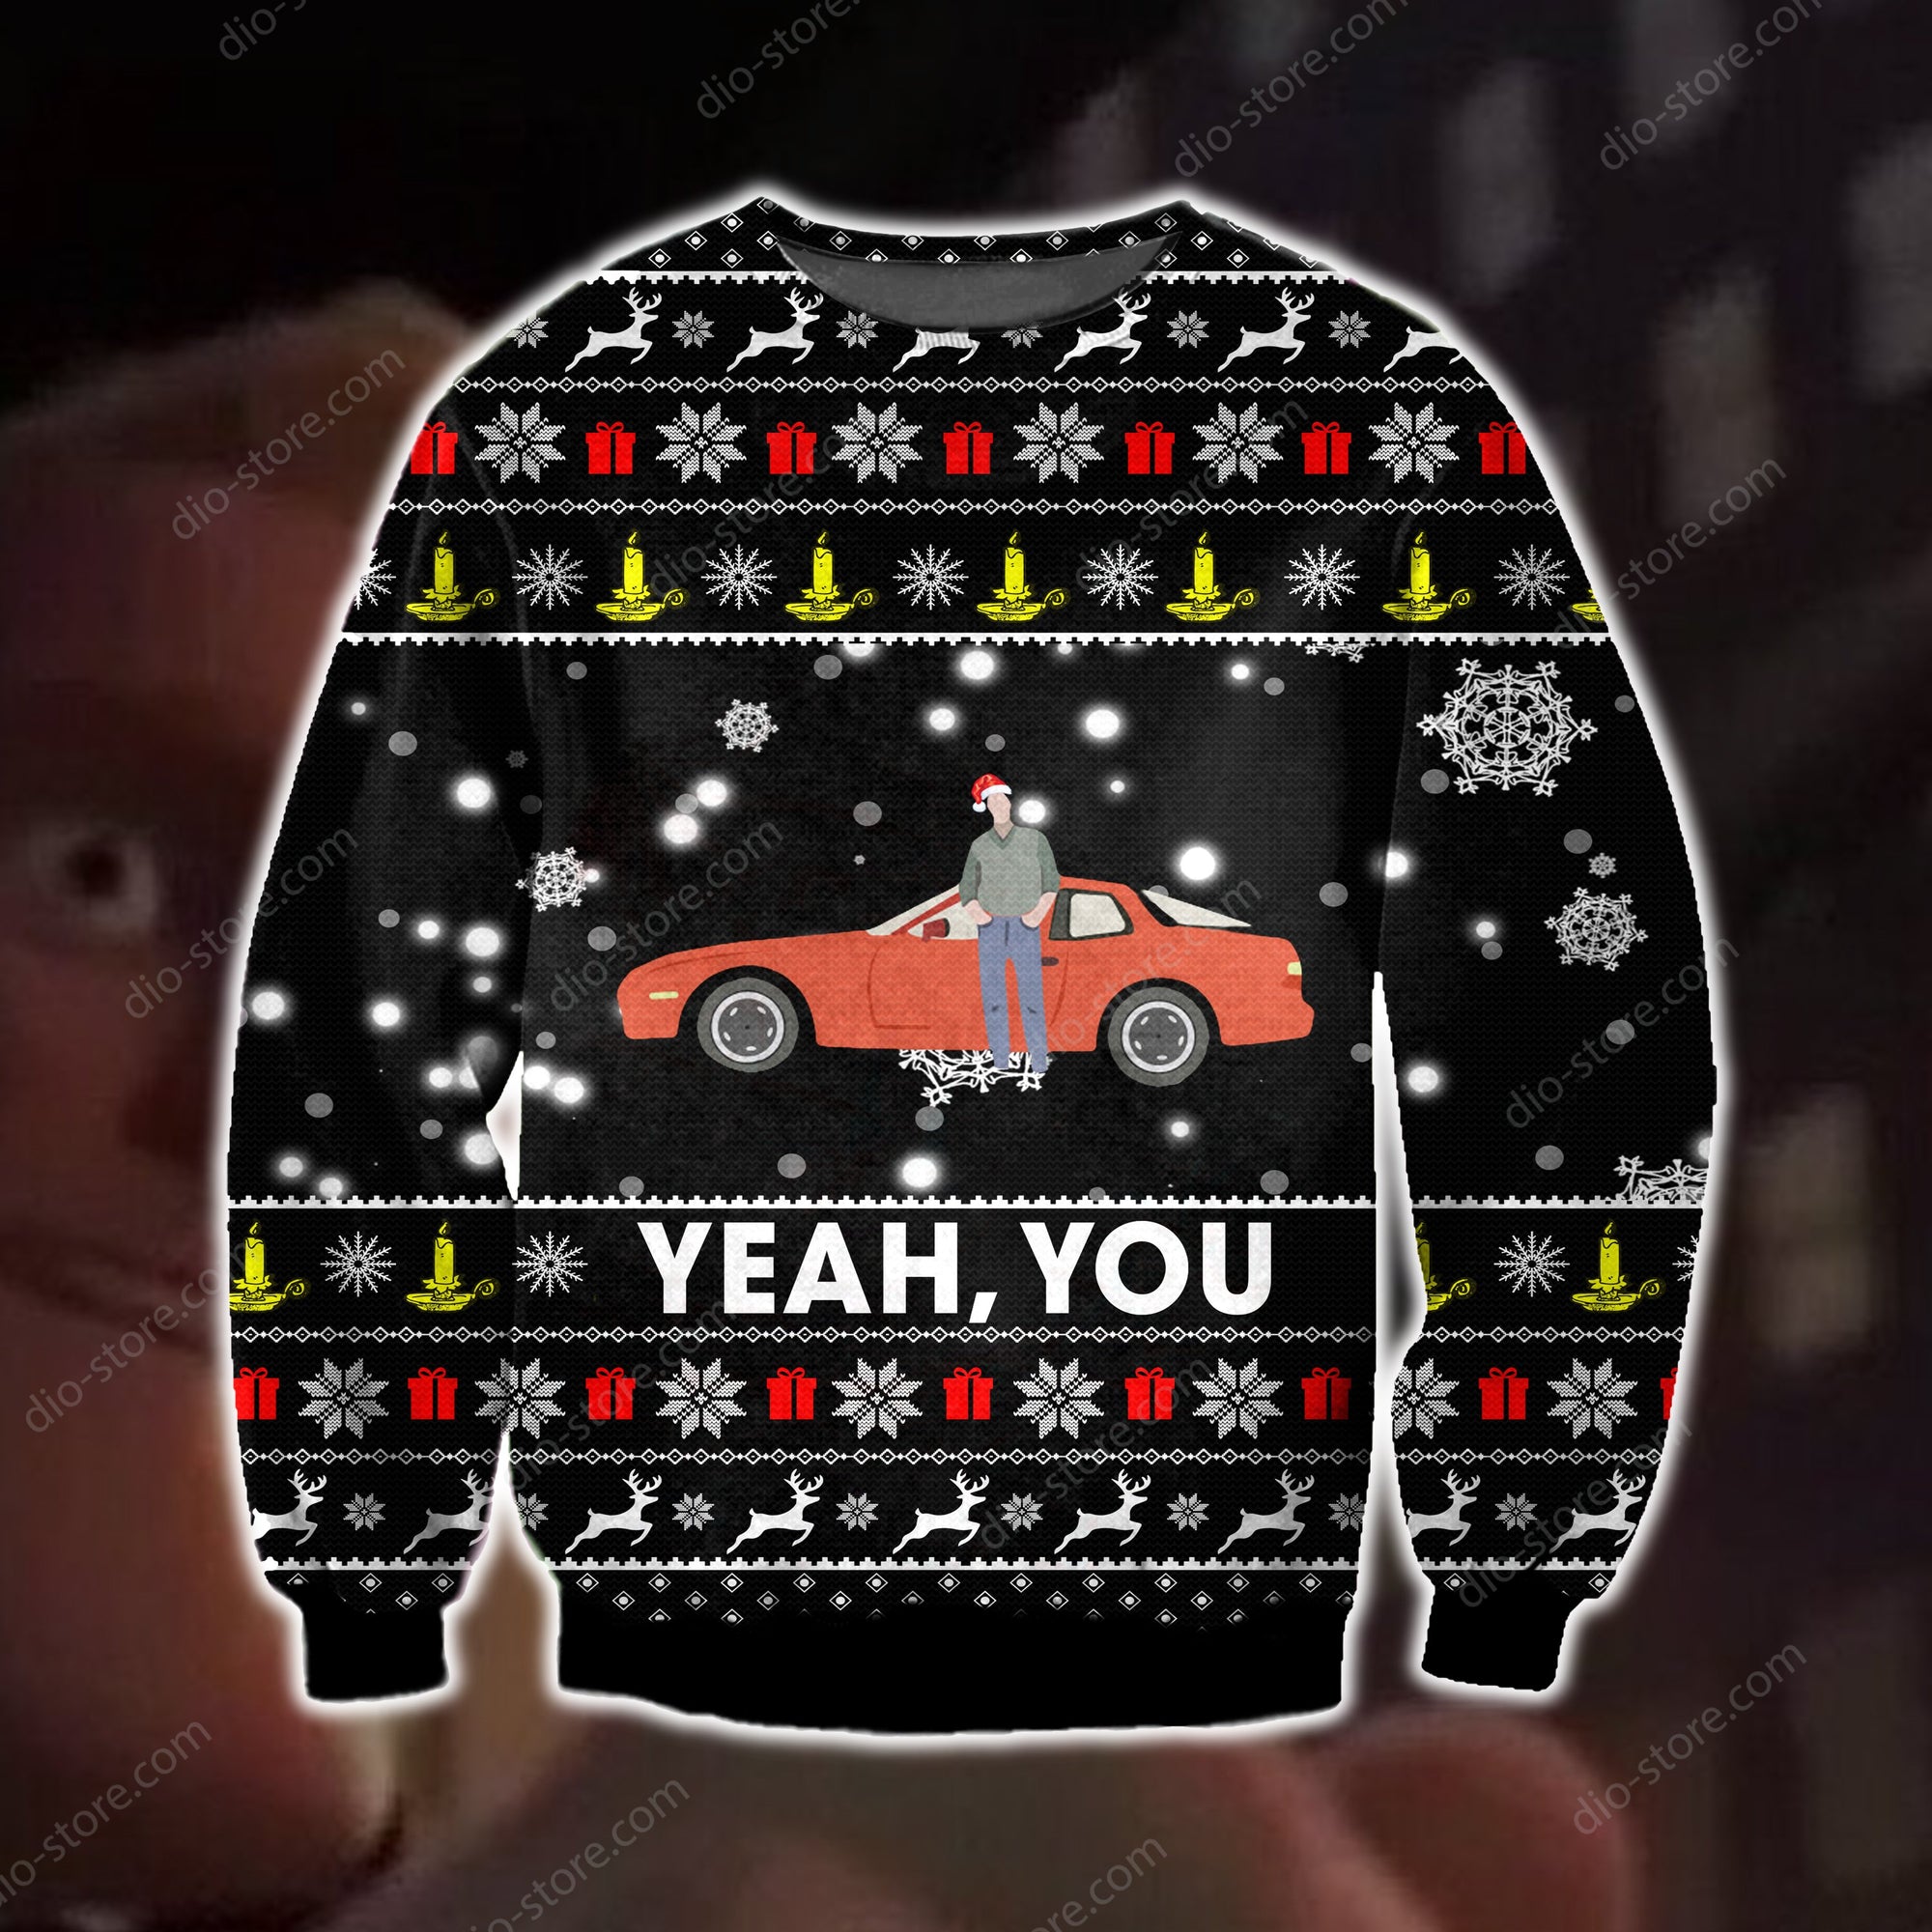 Yeah You- Sixteen Candles Knitting Pattern 3D Print Ugly Sweater Hoodie All Over Printed Cint10528